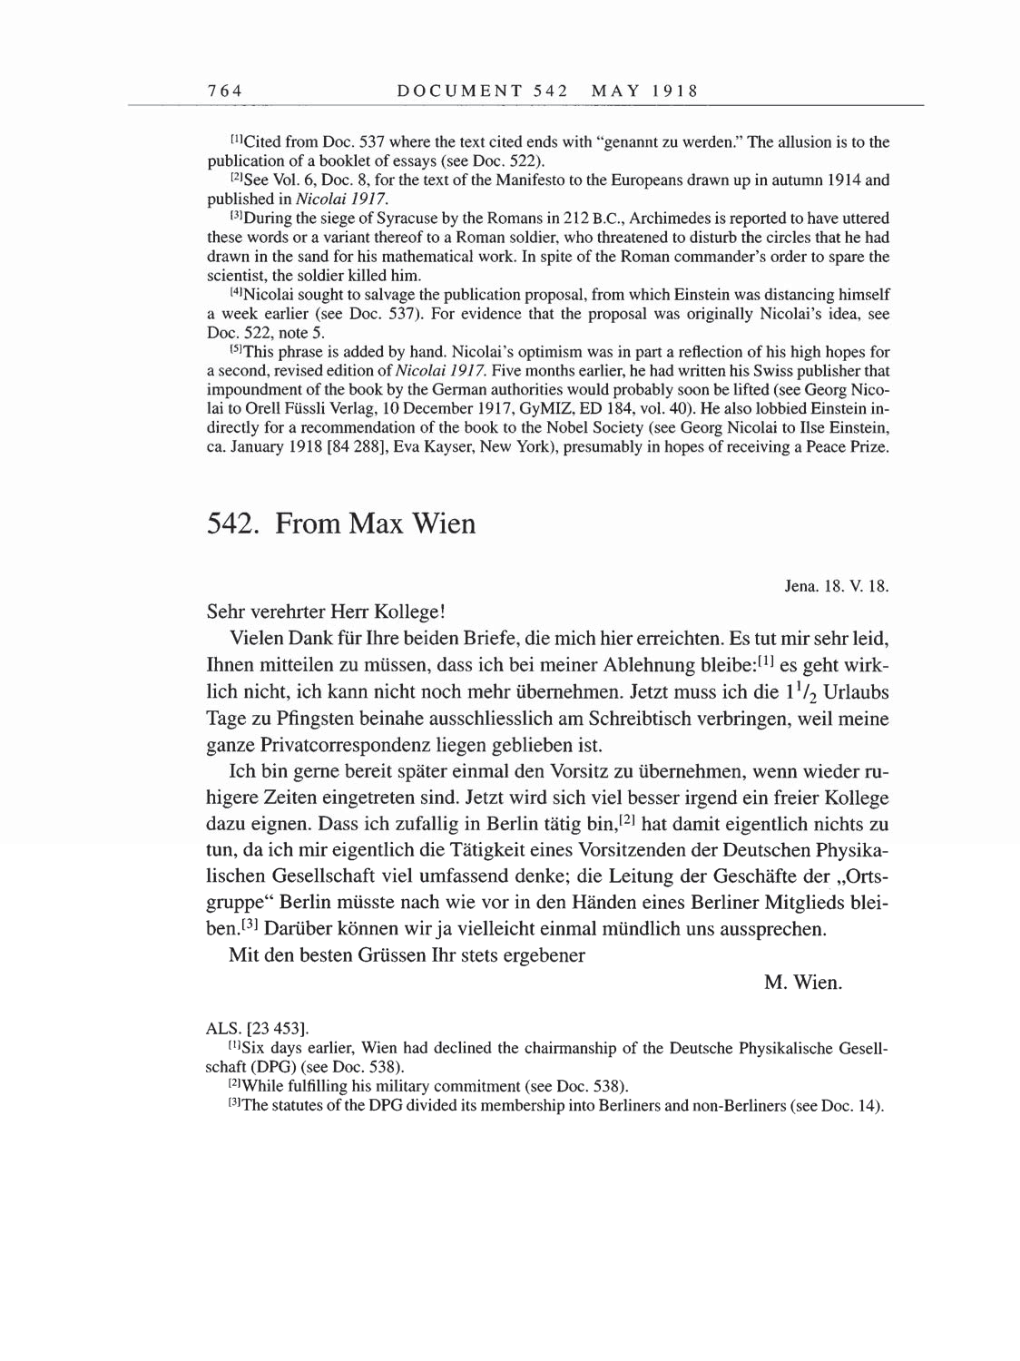 Volume 8, Part B: The Berlin Years: Correspondence 1918 page 764